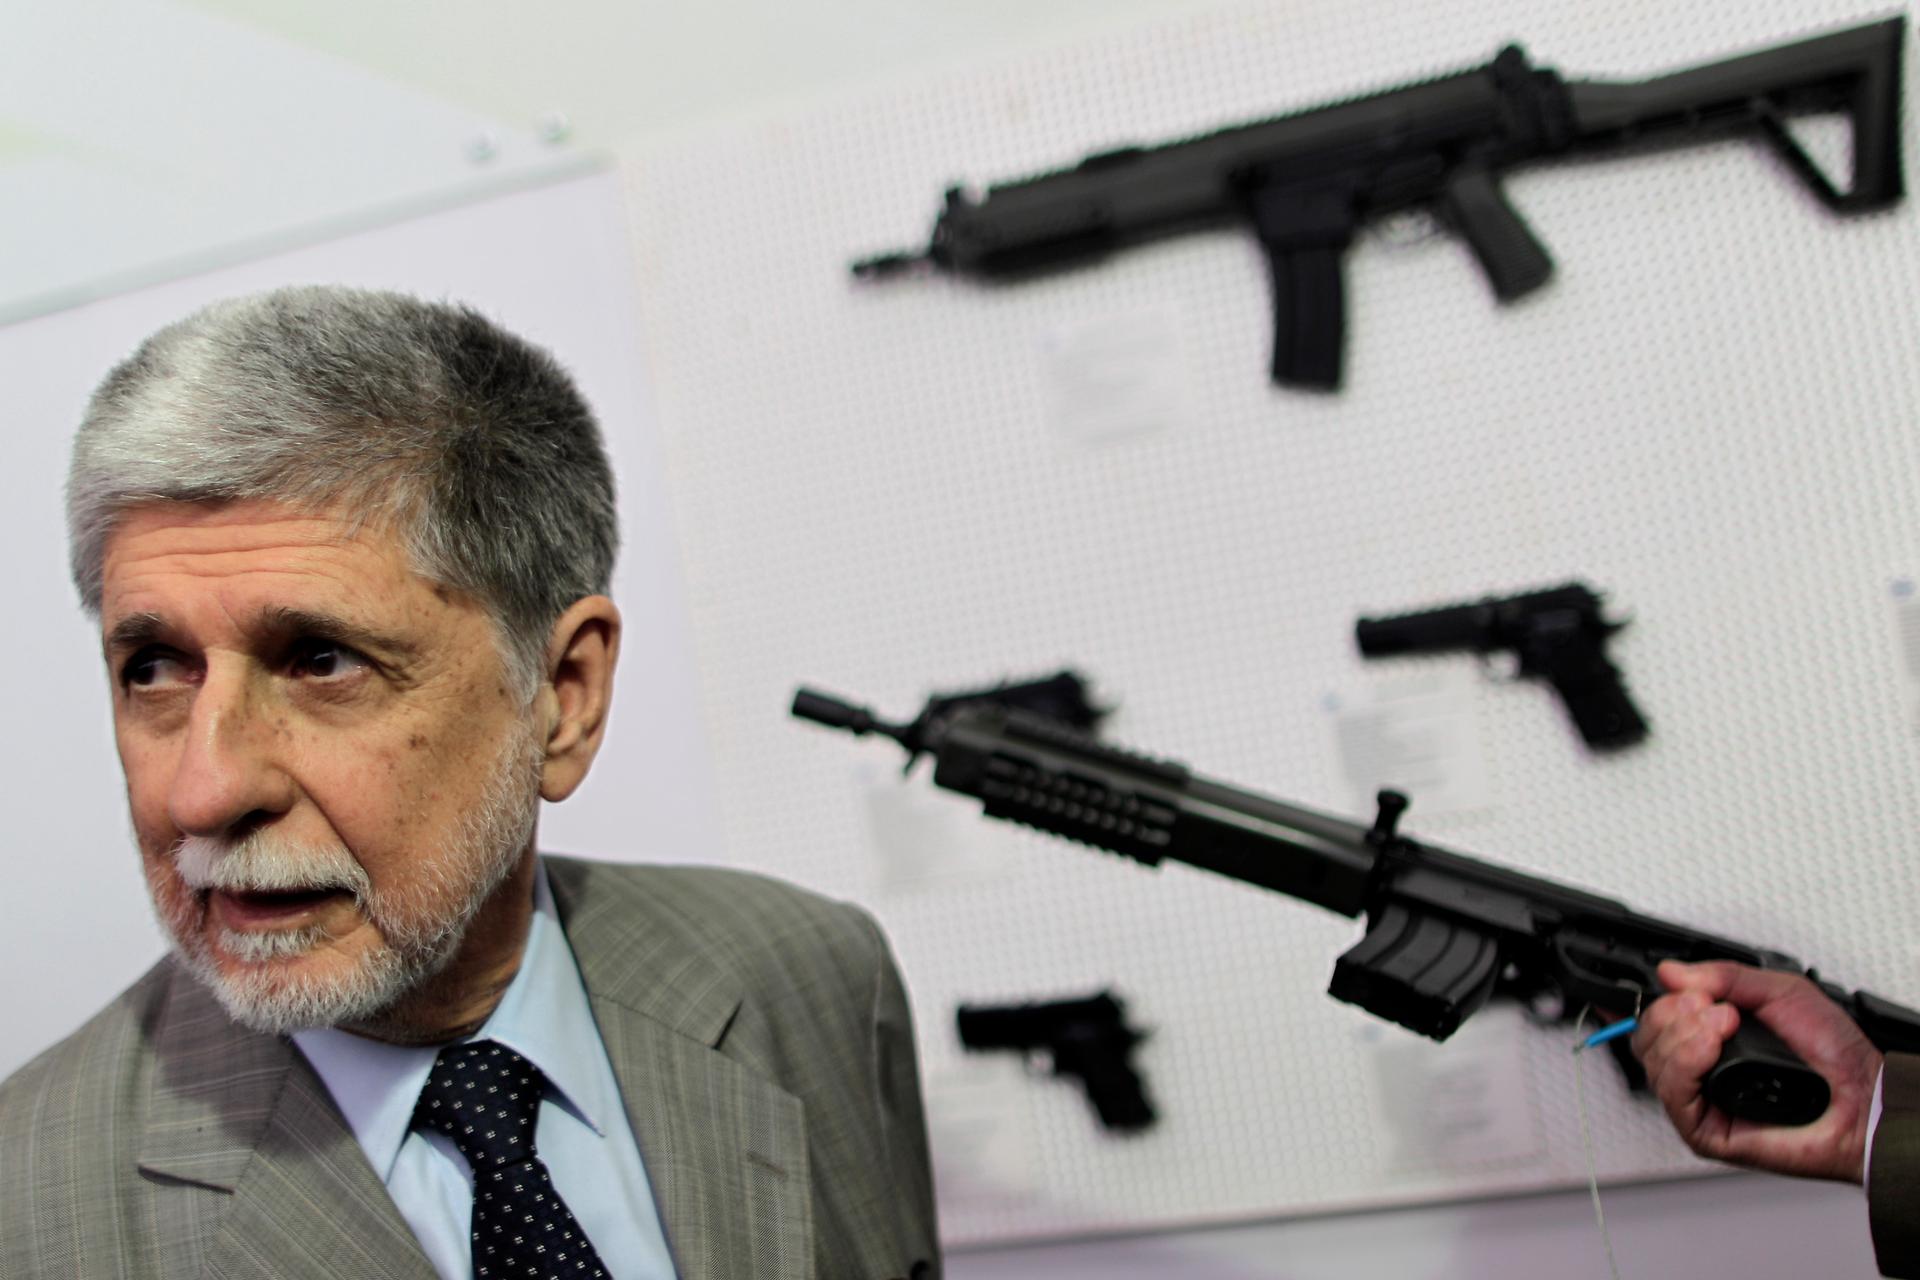 Brazil's Defense Minister Celso Amorim has agreed to investigate military facilities thought to have been the sites of torture during the country's dictatorship.